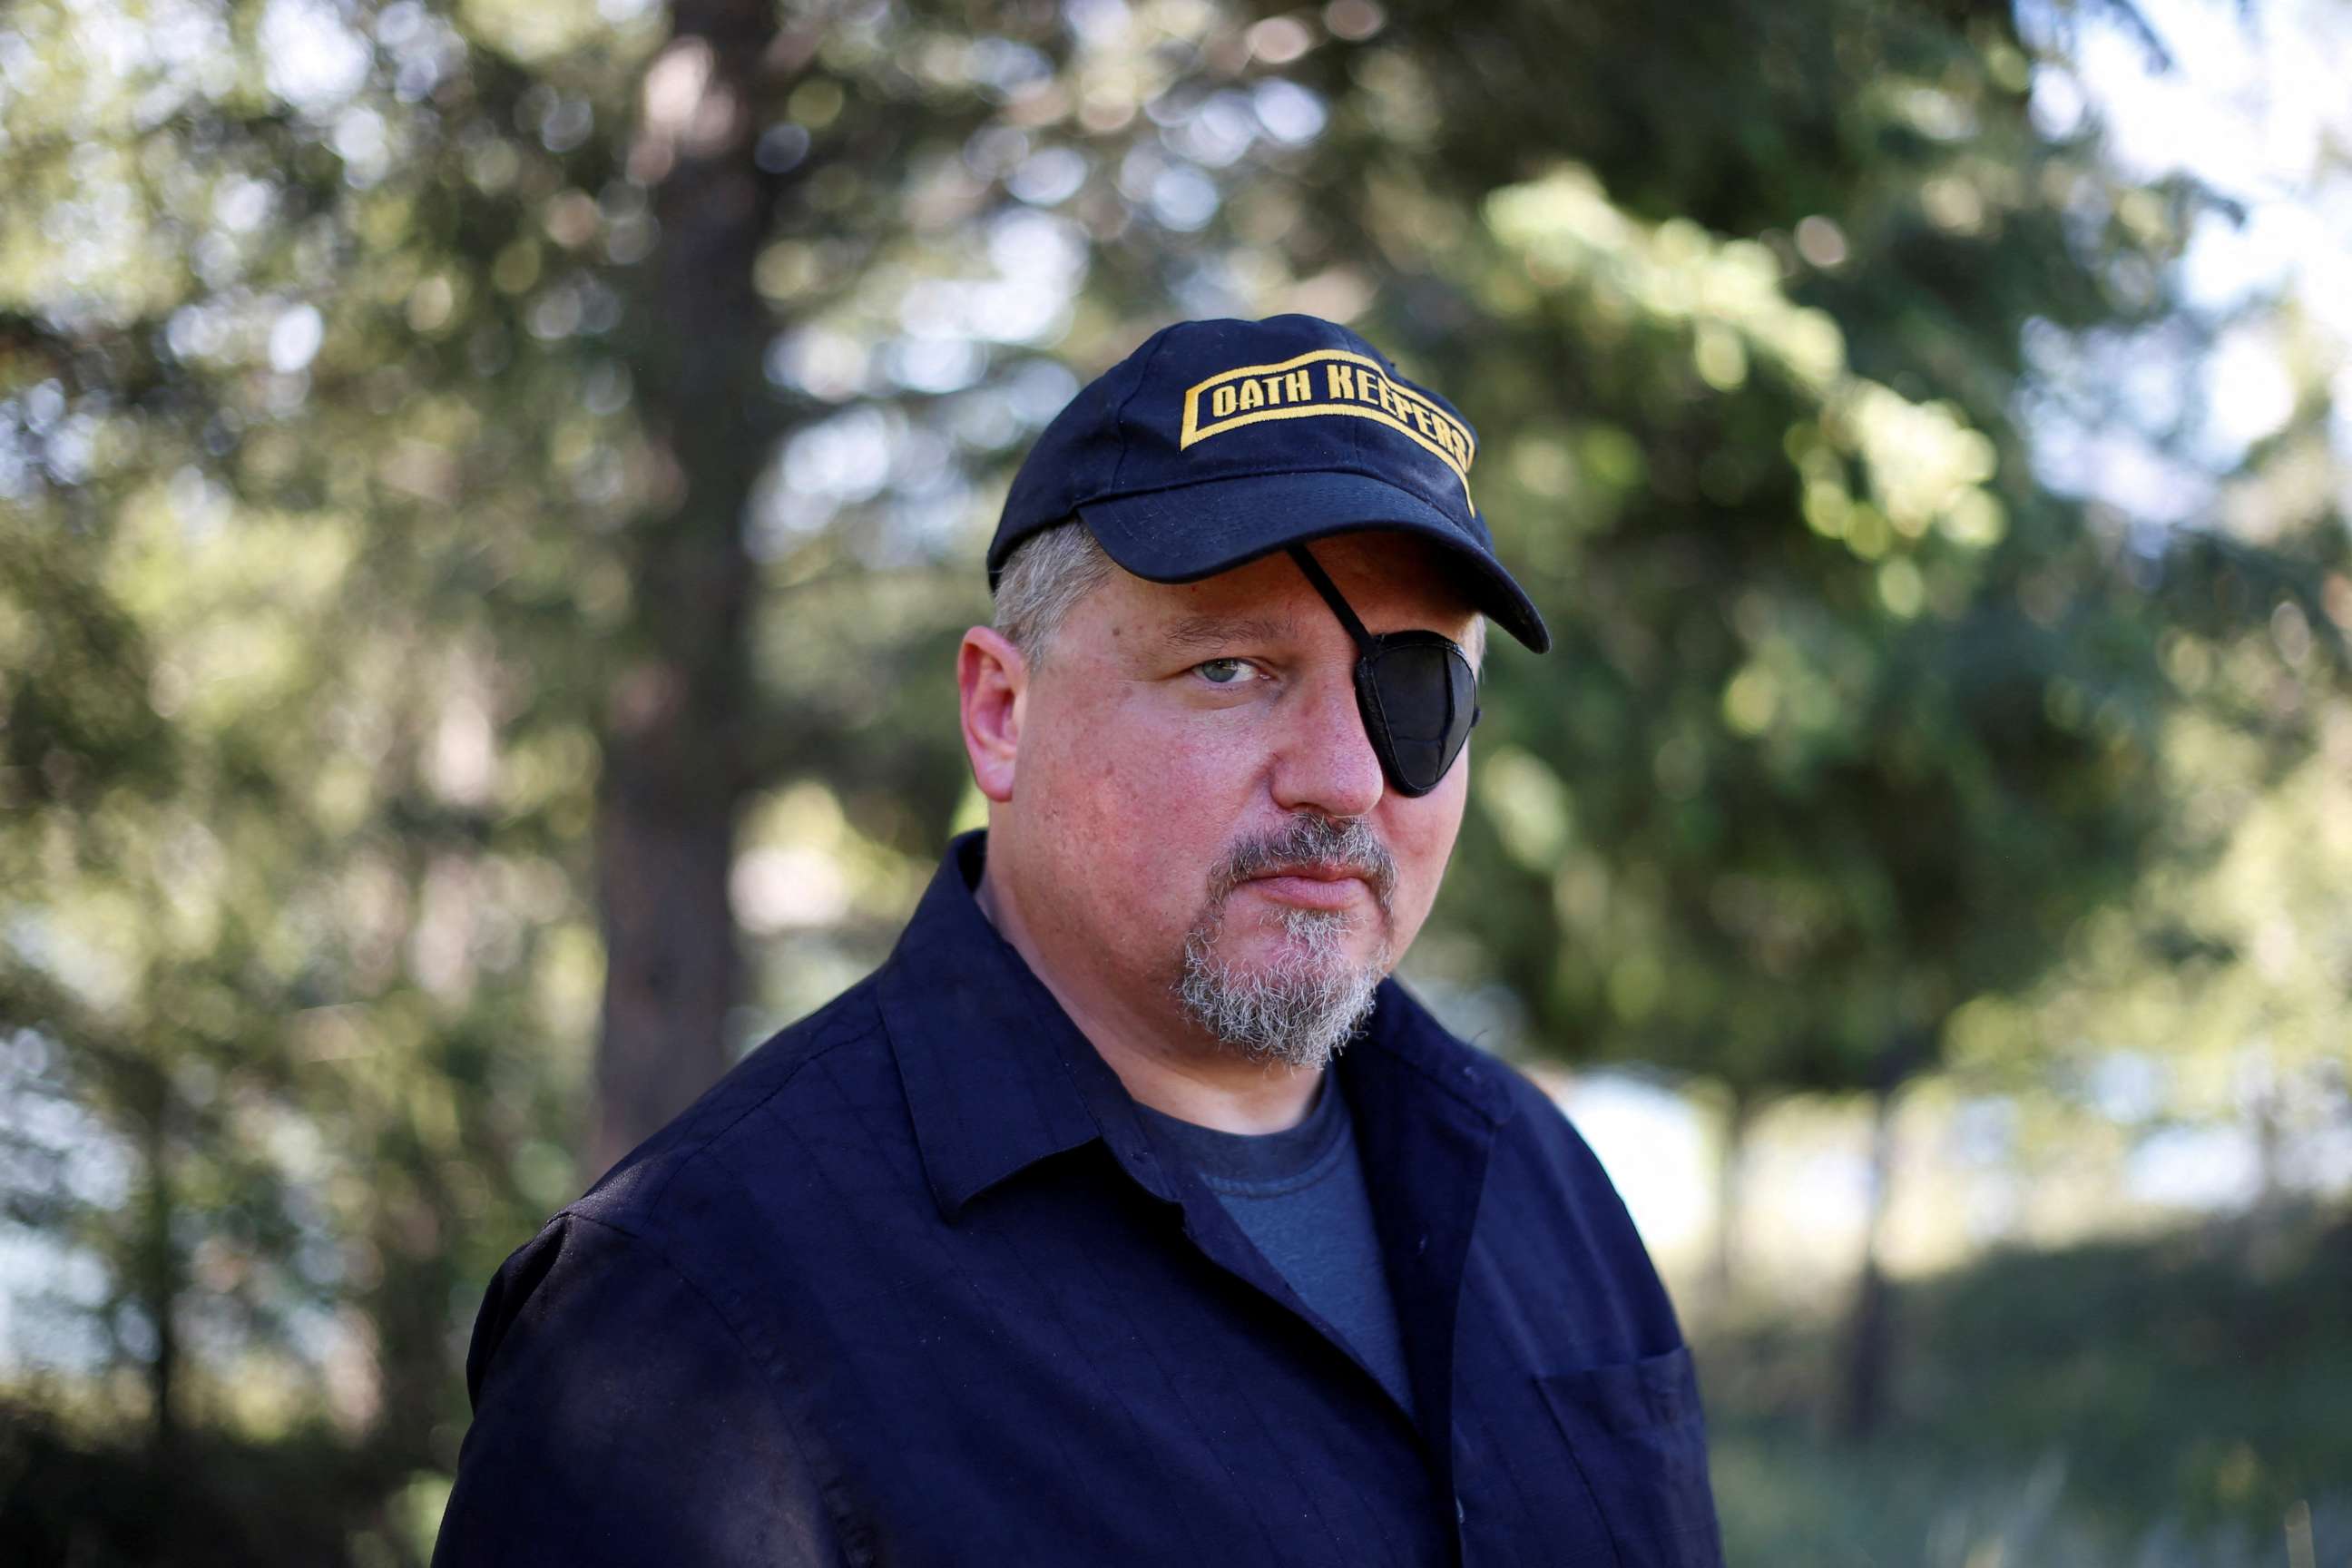 PHOTO: Oath Keepers militia founder Stewart Rhodes poses during an interview session in Eureka, Montana, U.S. June 20, 2016. REUTERS/Jim Urquhart/File Photo